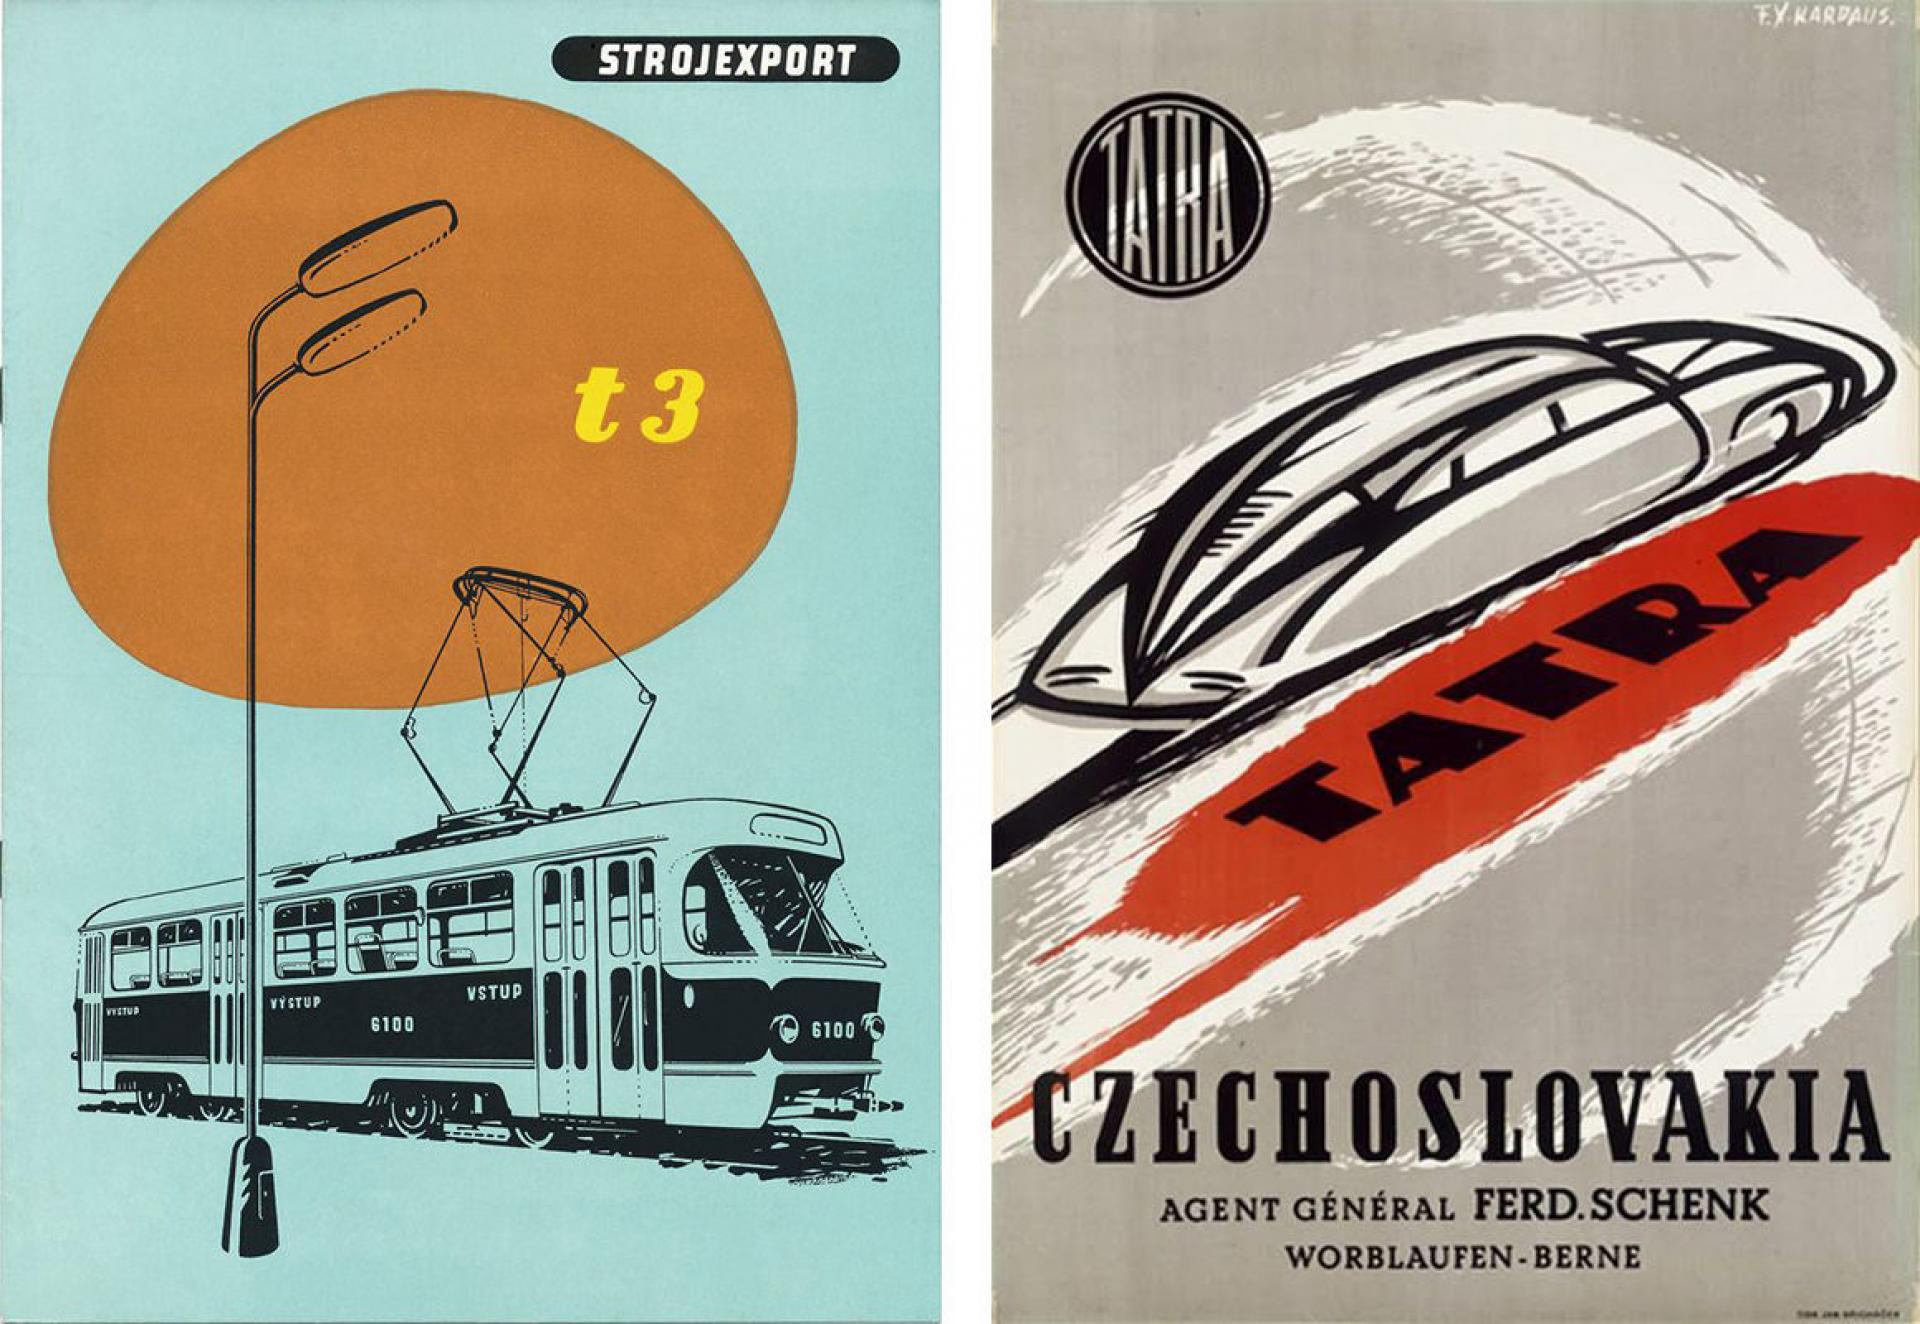 Left: Cover of a 1962 sales brochure from Strojexport, featuring the Tatra T3 tramcar. Right: Vintage poster featuring the Tatra T77.